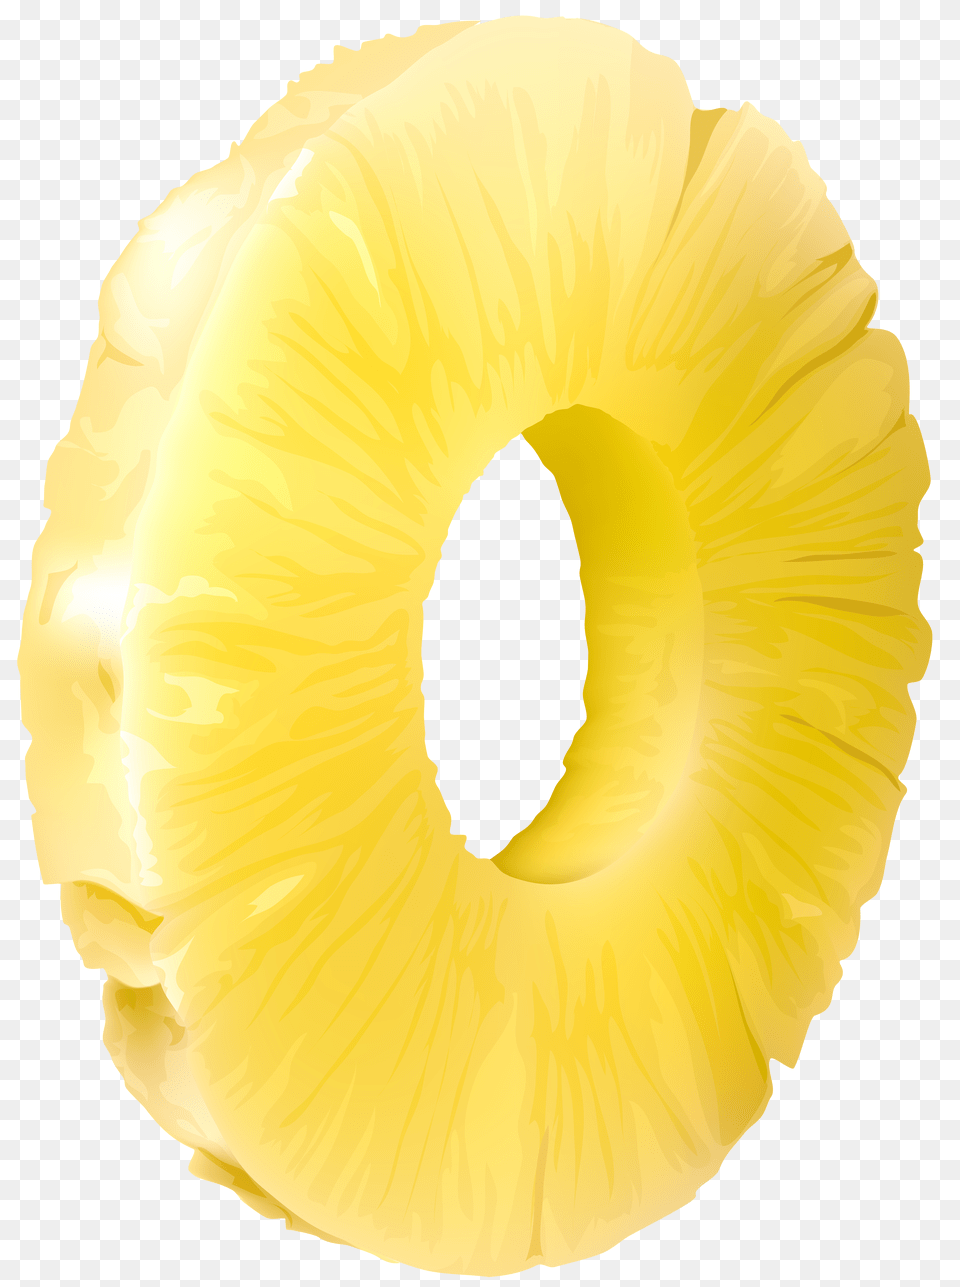 Slice Of Pineapple Clipart Full Size Clipart Transparent Background Sliced Pineapple Transparent, Produce, Food, Fruit, Plant Png Image